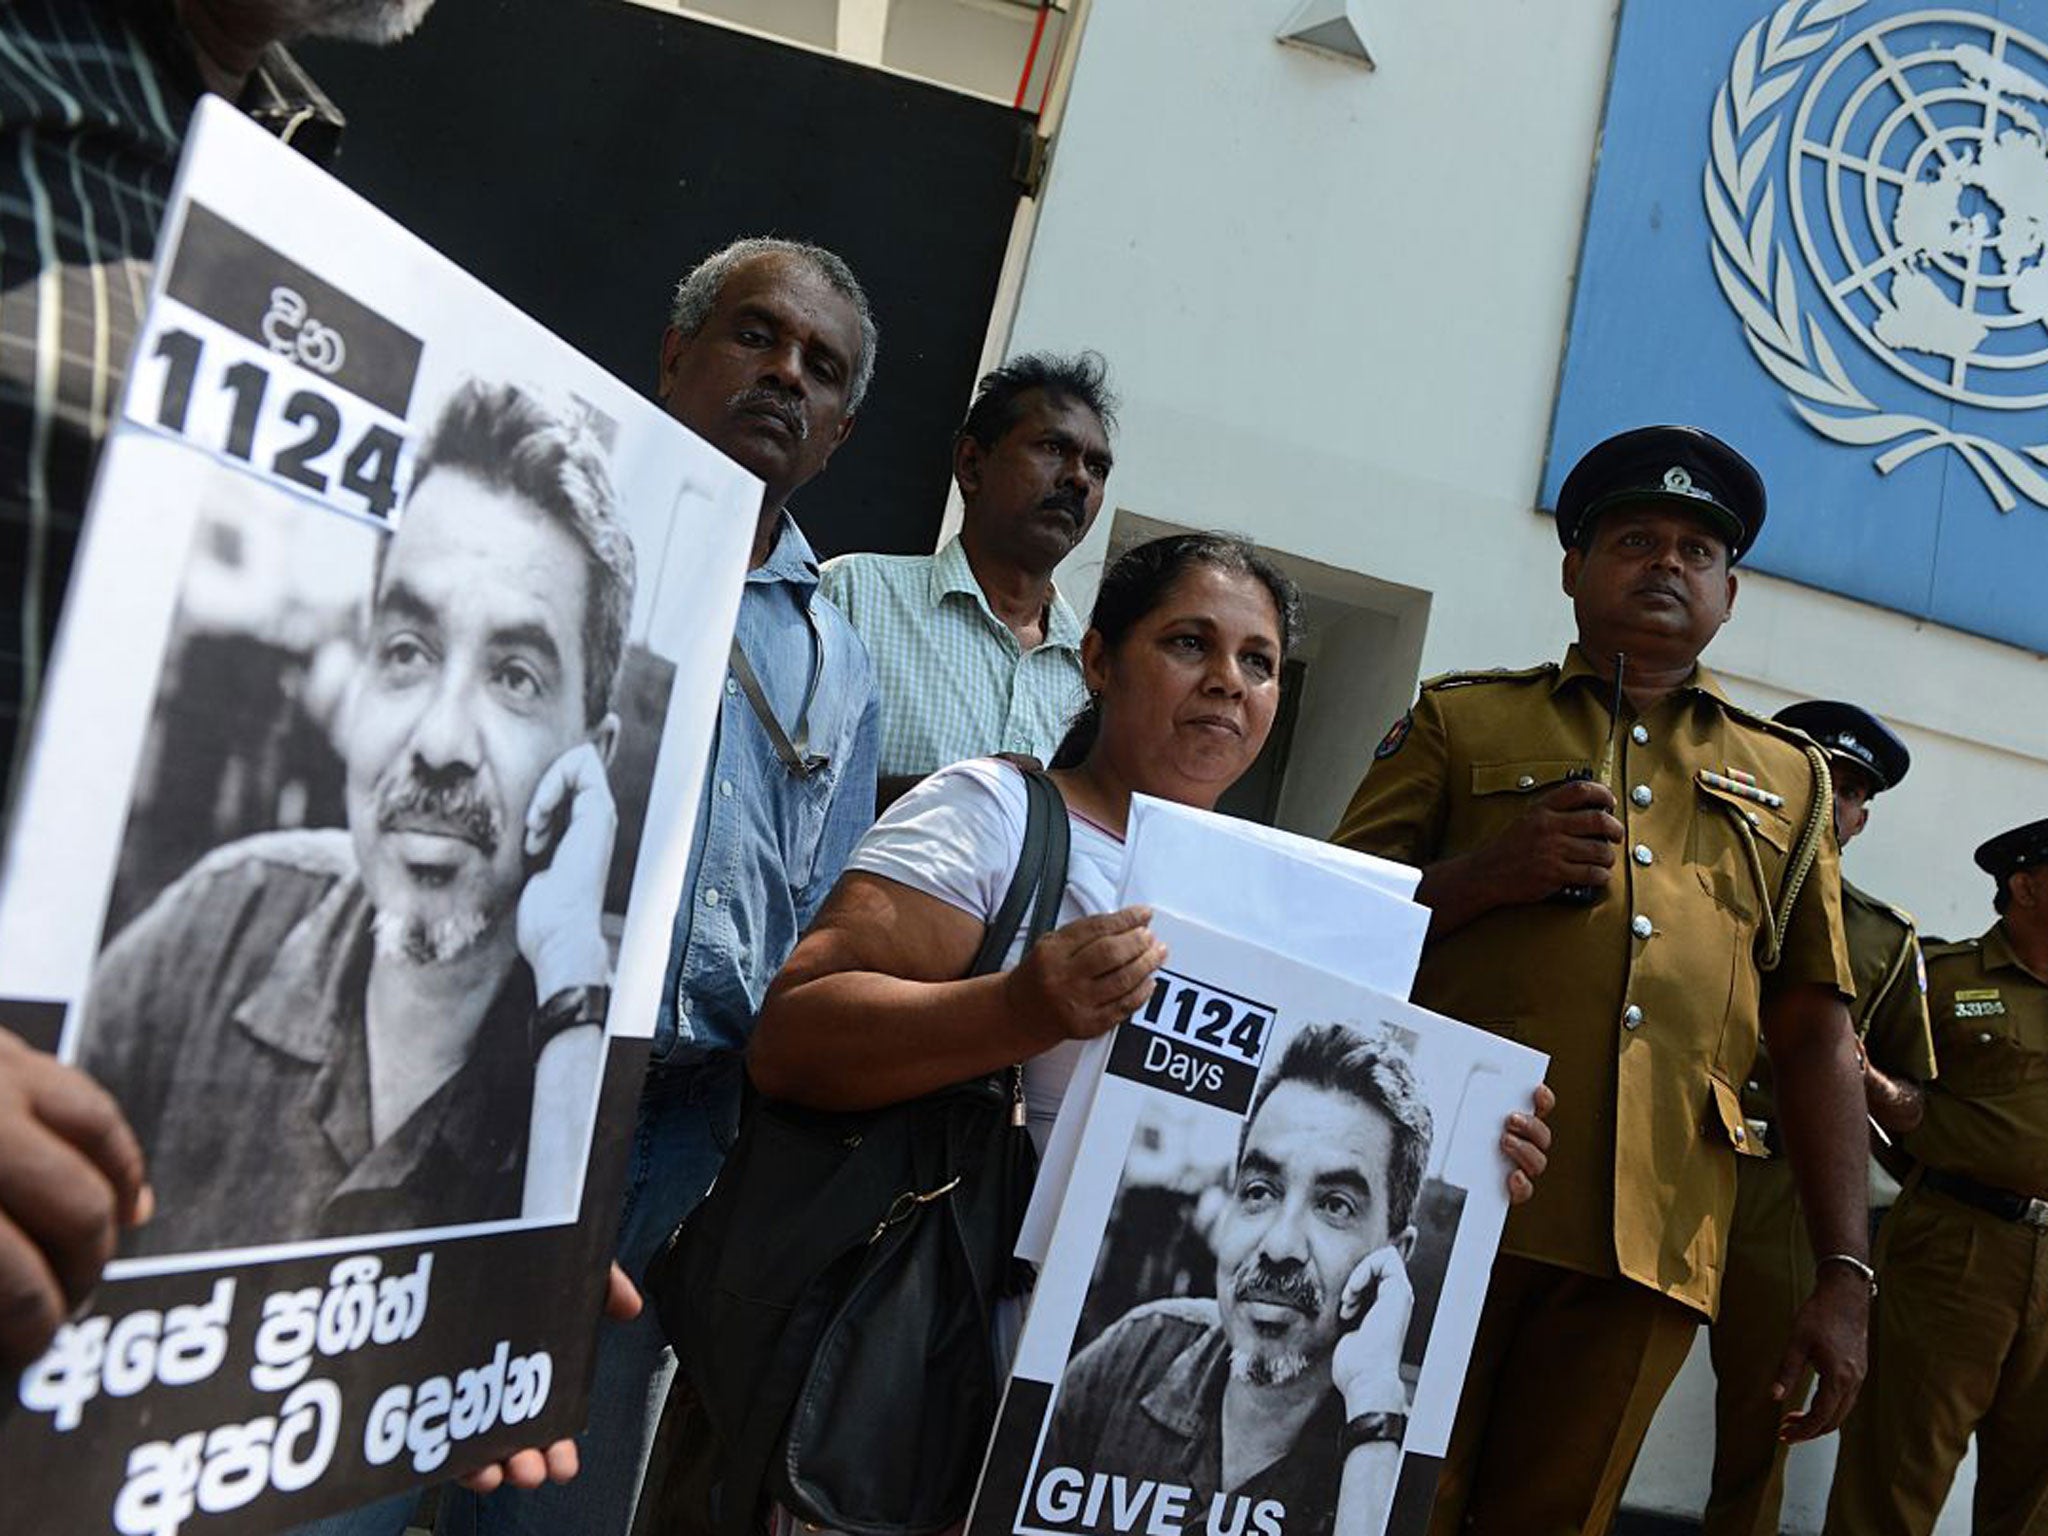 Sandhya Eknaligoda (C), wife of missing Sri Lankan cartoonist Prageeth Eknelygoda, holds a placard bearing his image outside the United Nations offices in Colombo on February 21, 2013. Eknaligoda urged UN intervention to locate her husband, missing since